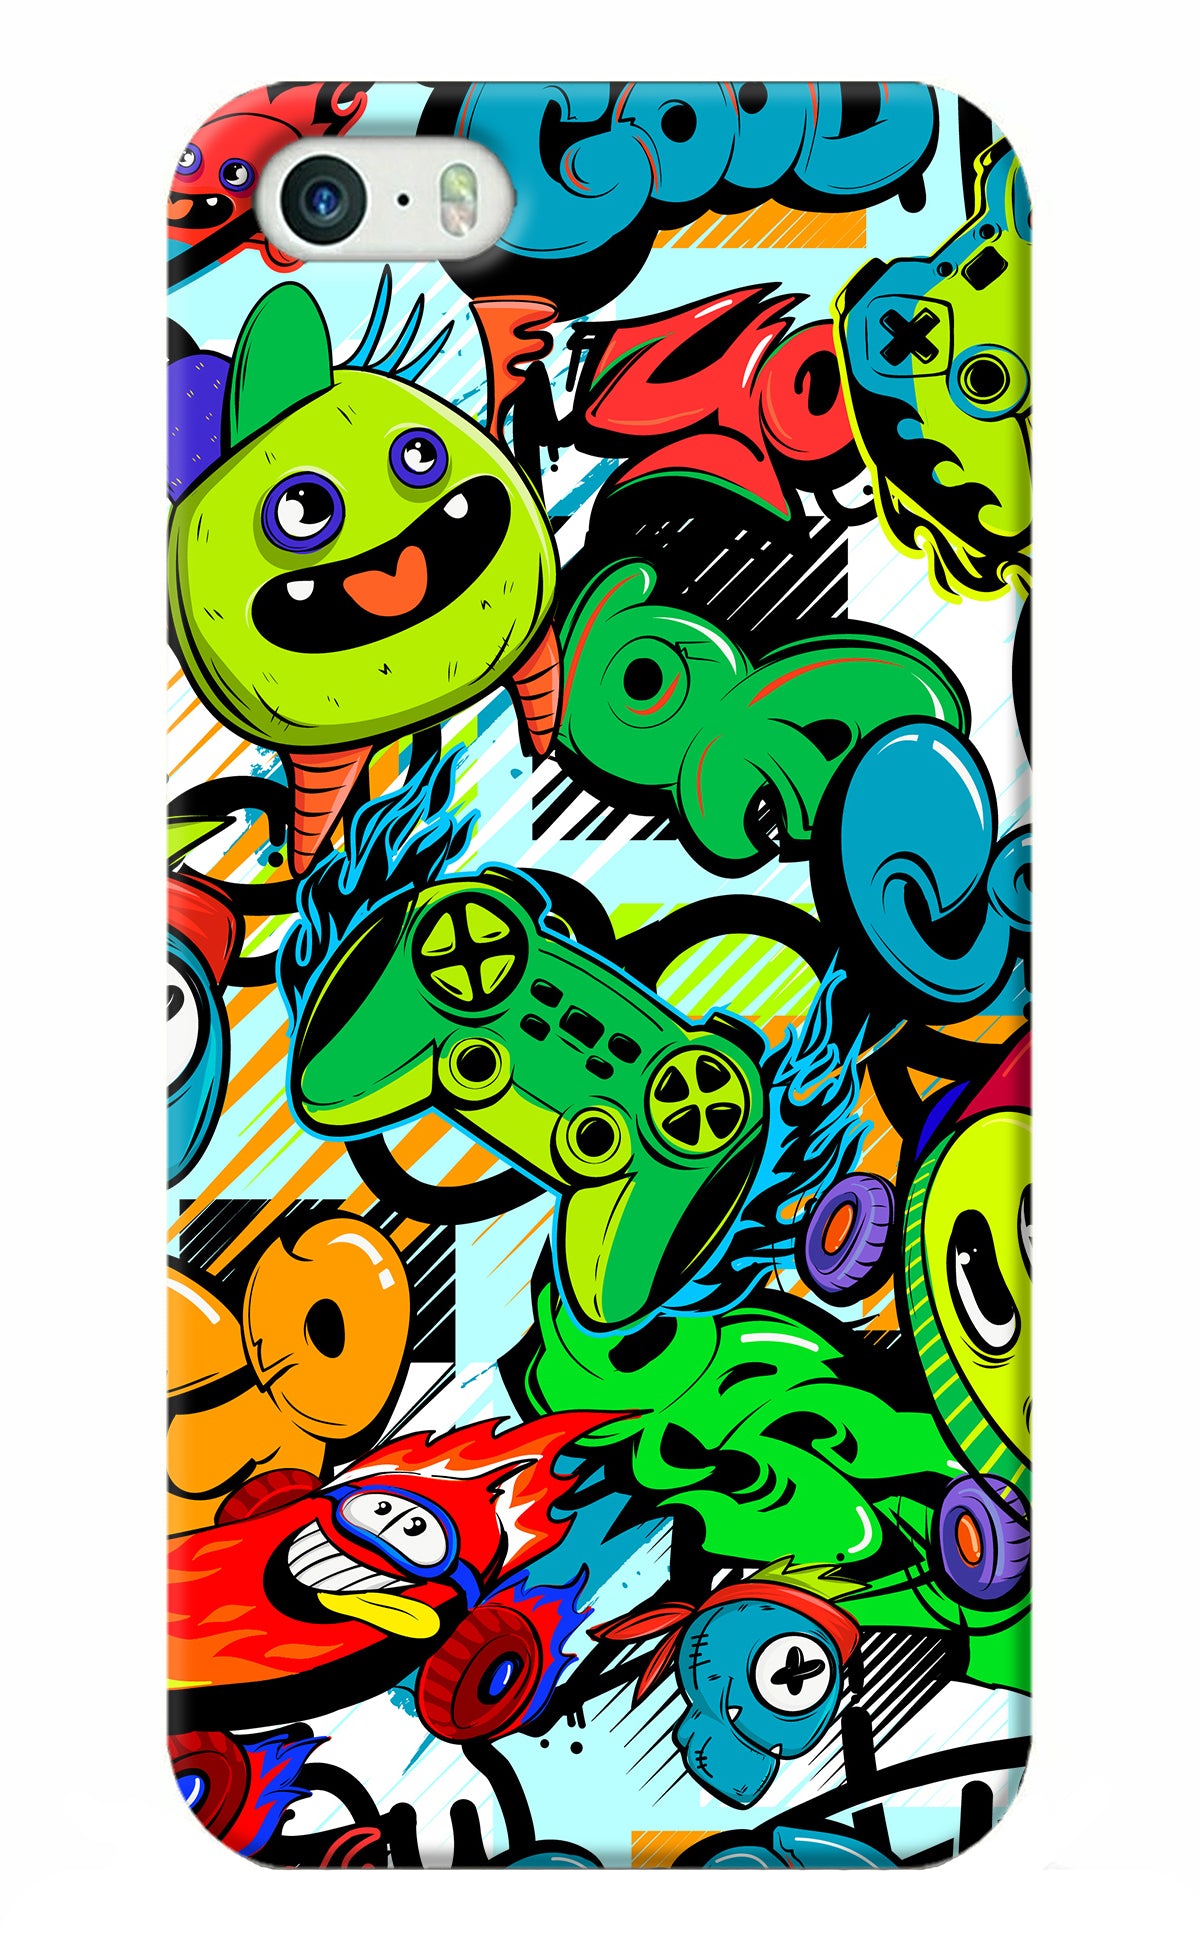 Game Doodle iPhone 5/5s Back Cover